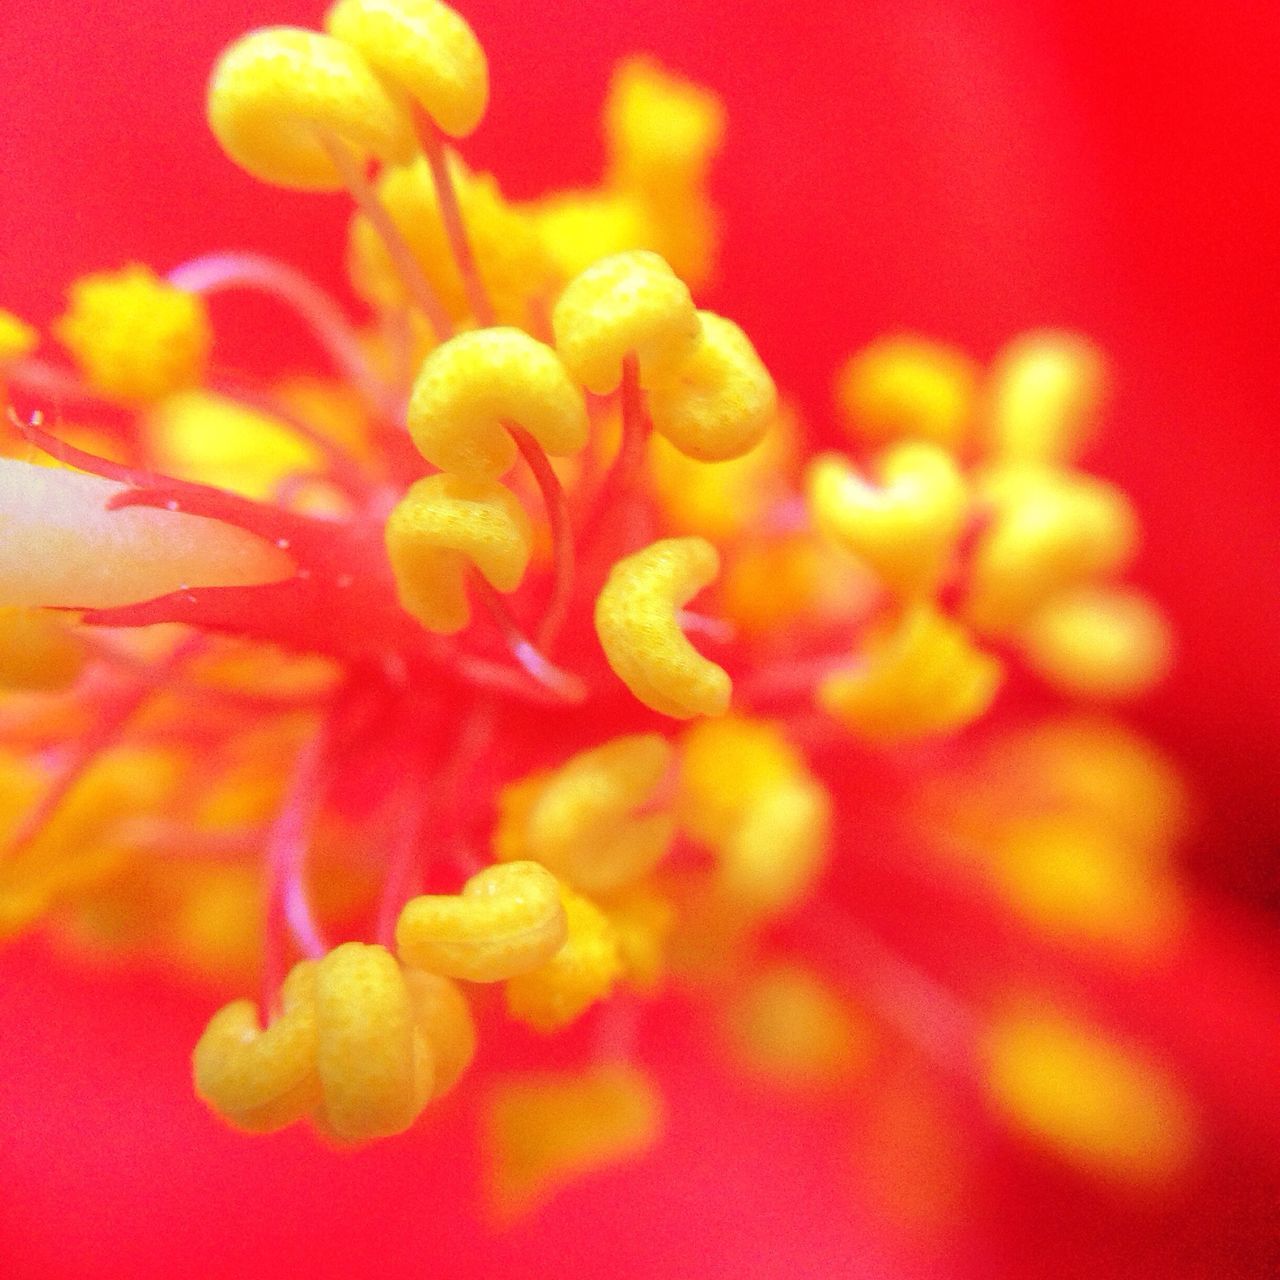 flower, petal, flower head, freshness, fragility, beauty in nature, close-up, growth, stamen, nature, pollen, selective focus, single flower, blooming, red, yellow, extreme close-up, full frame, backgrounds, macro